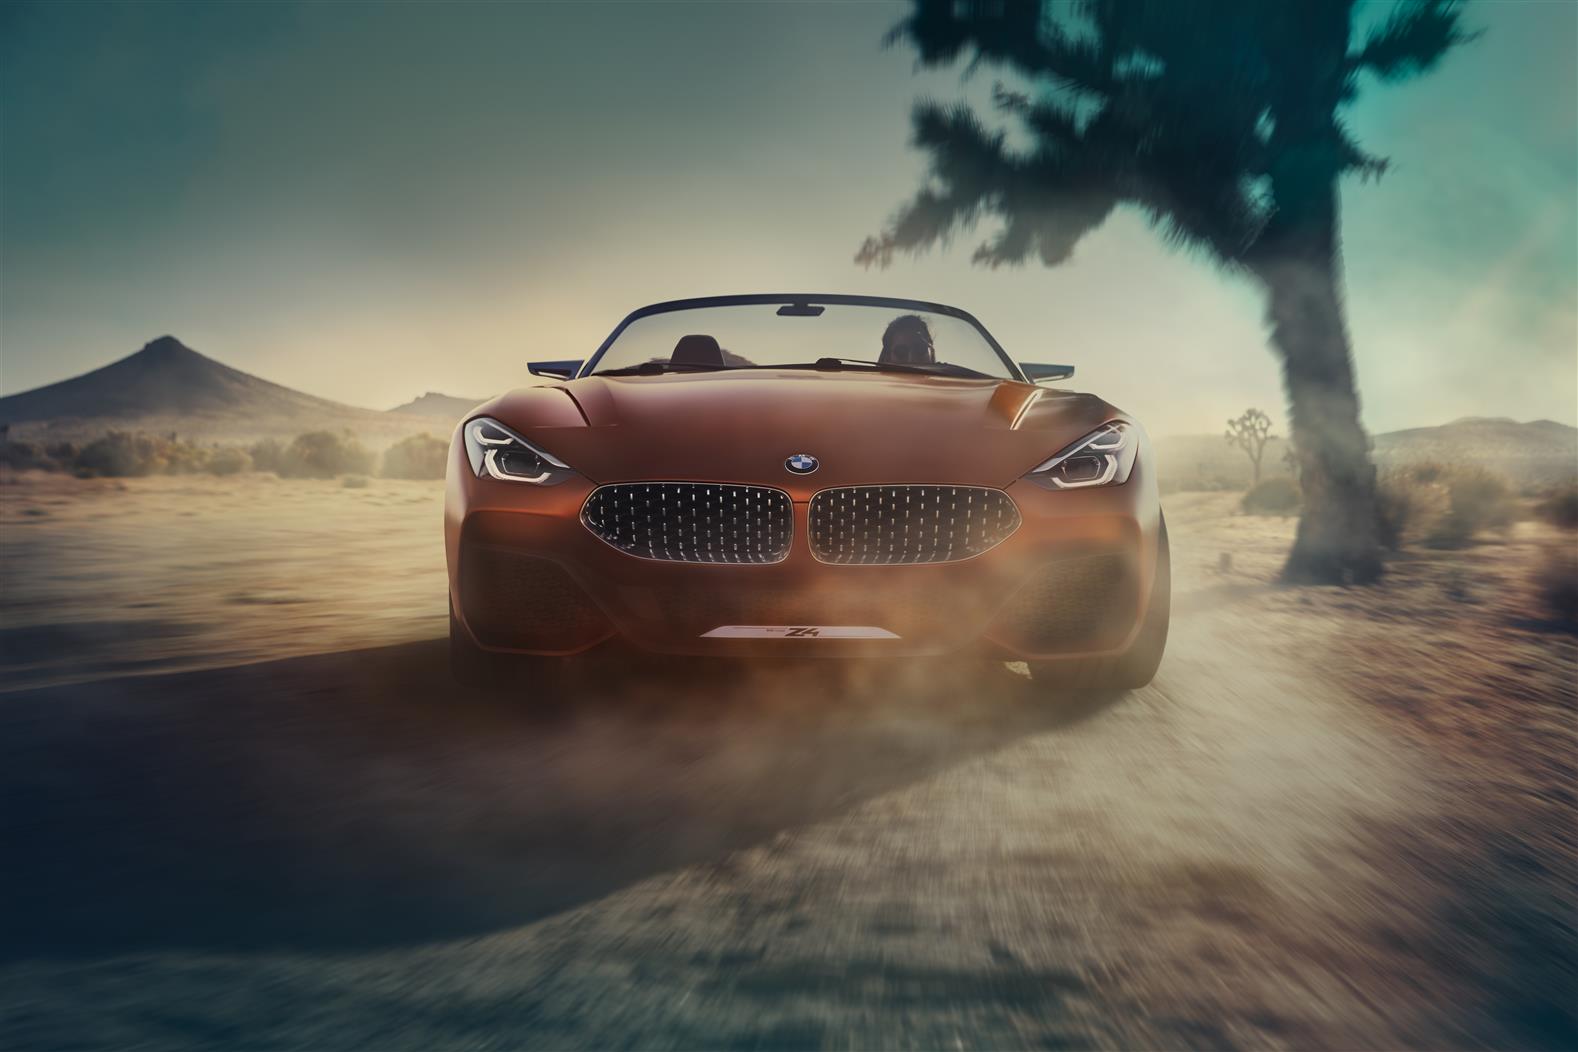 The BMW Concept Z4. Freedom on four wheels.